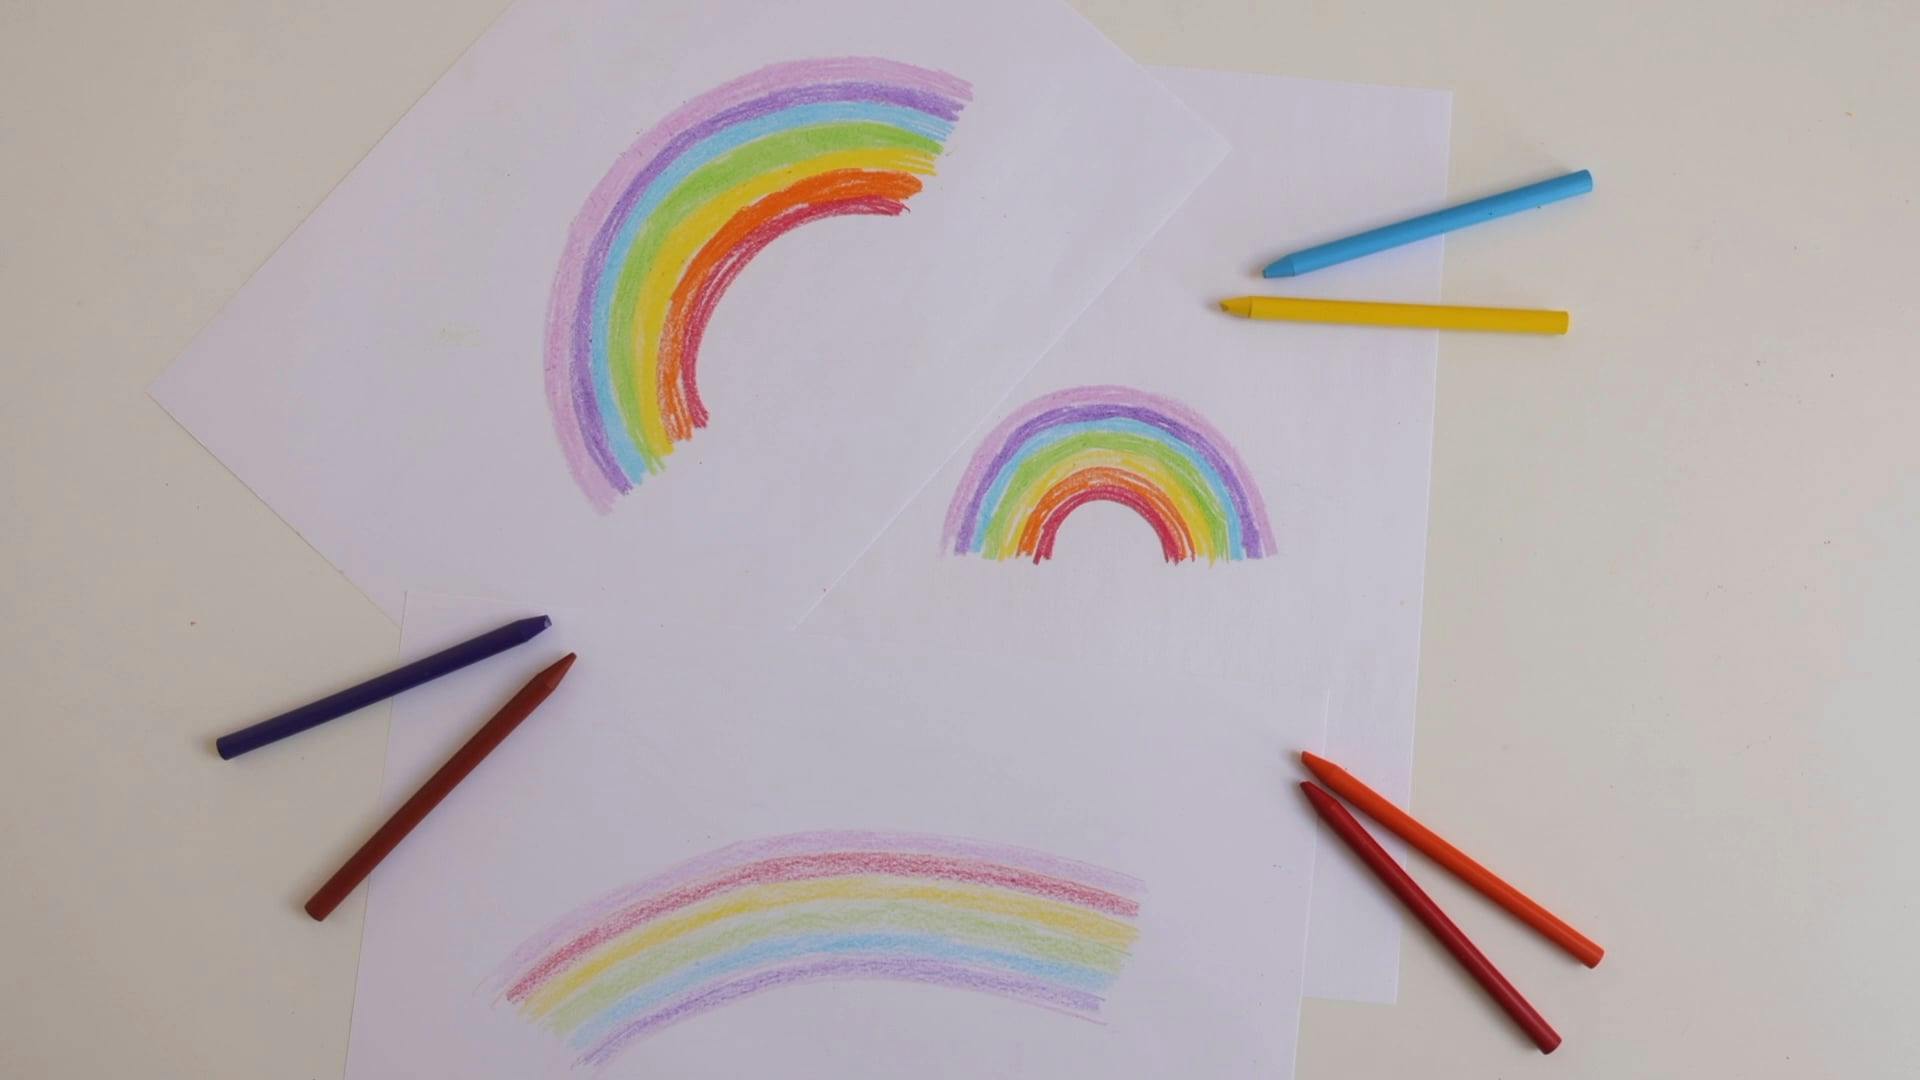 How to draw a rainbow - YouTube